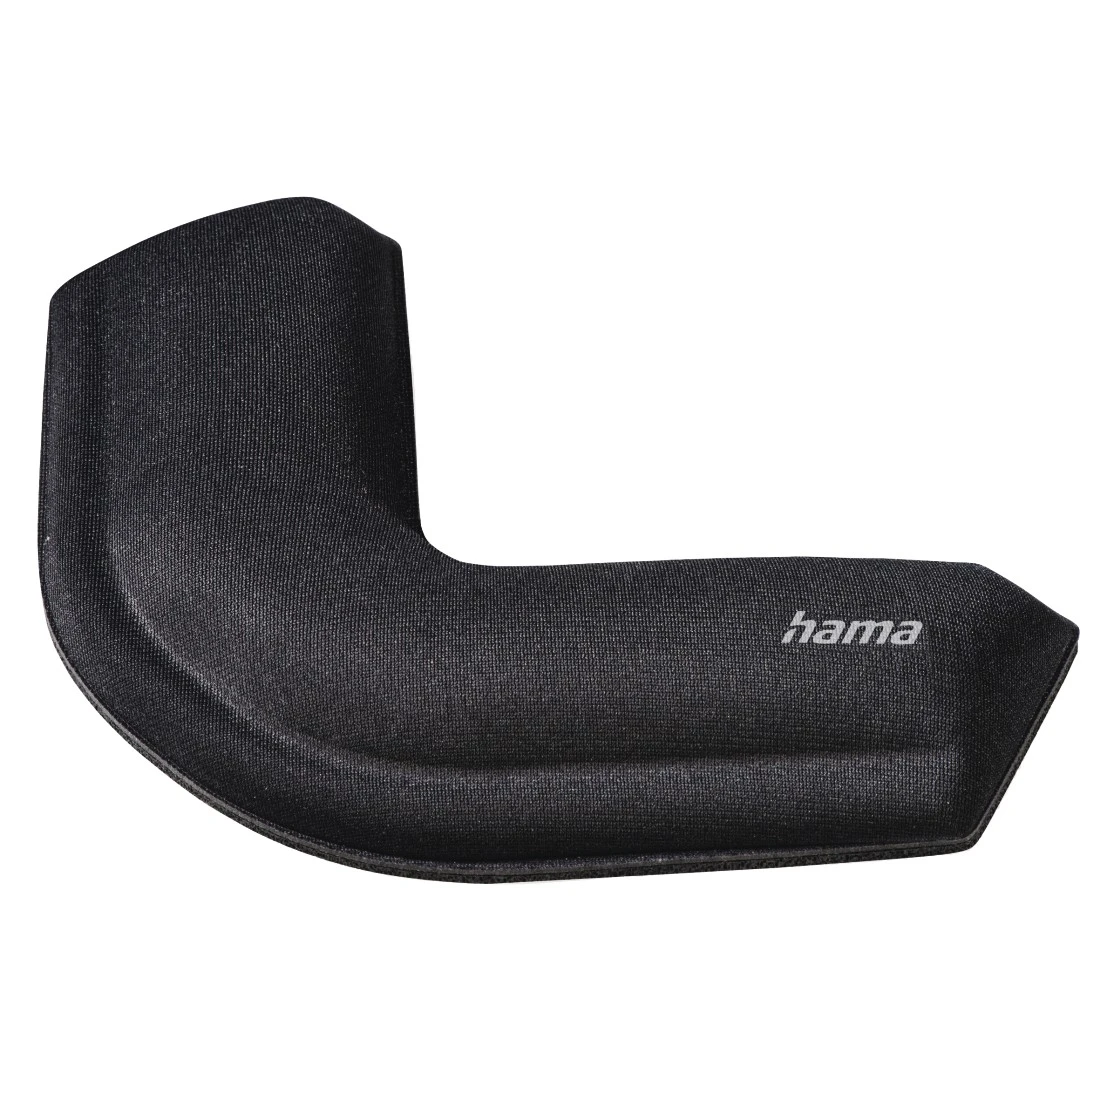 You Recently Viewed Hama 00054720 Bow Wrist Rest Image